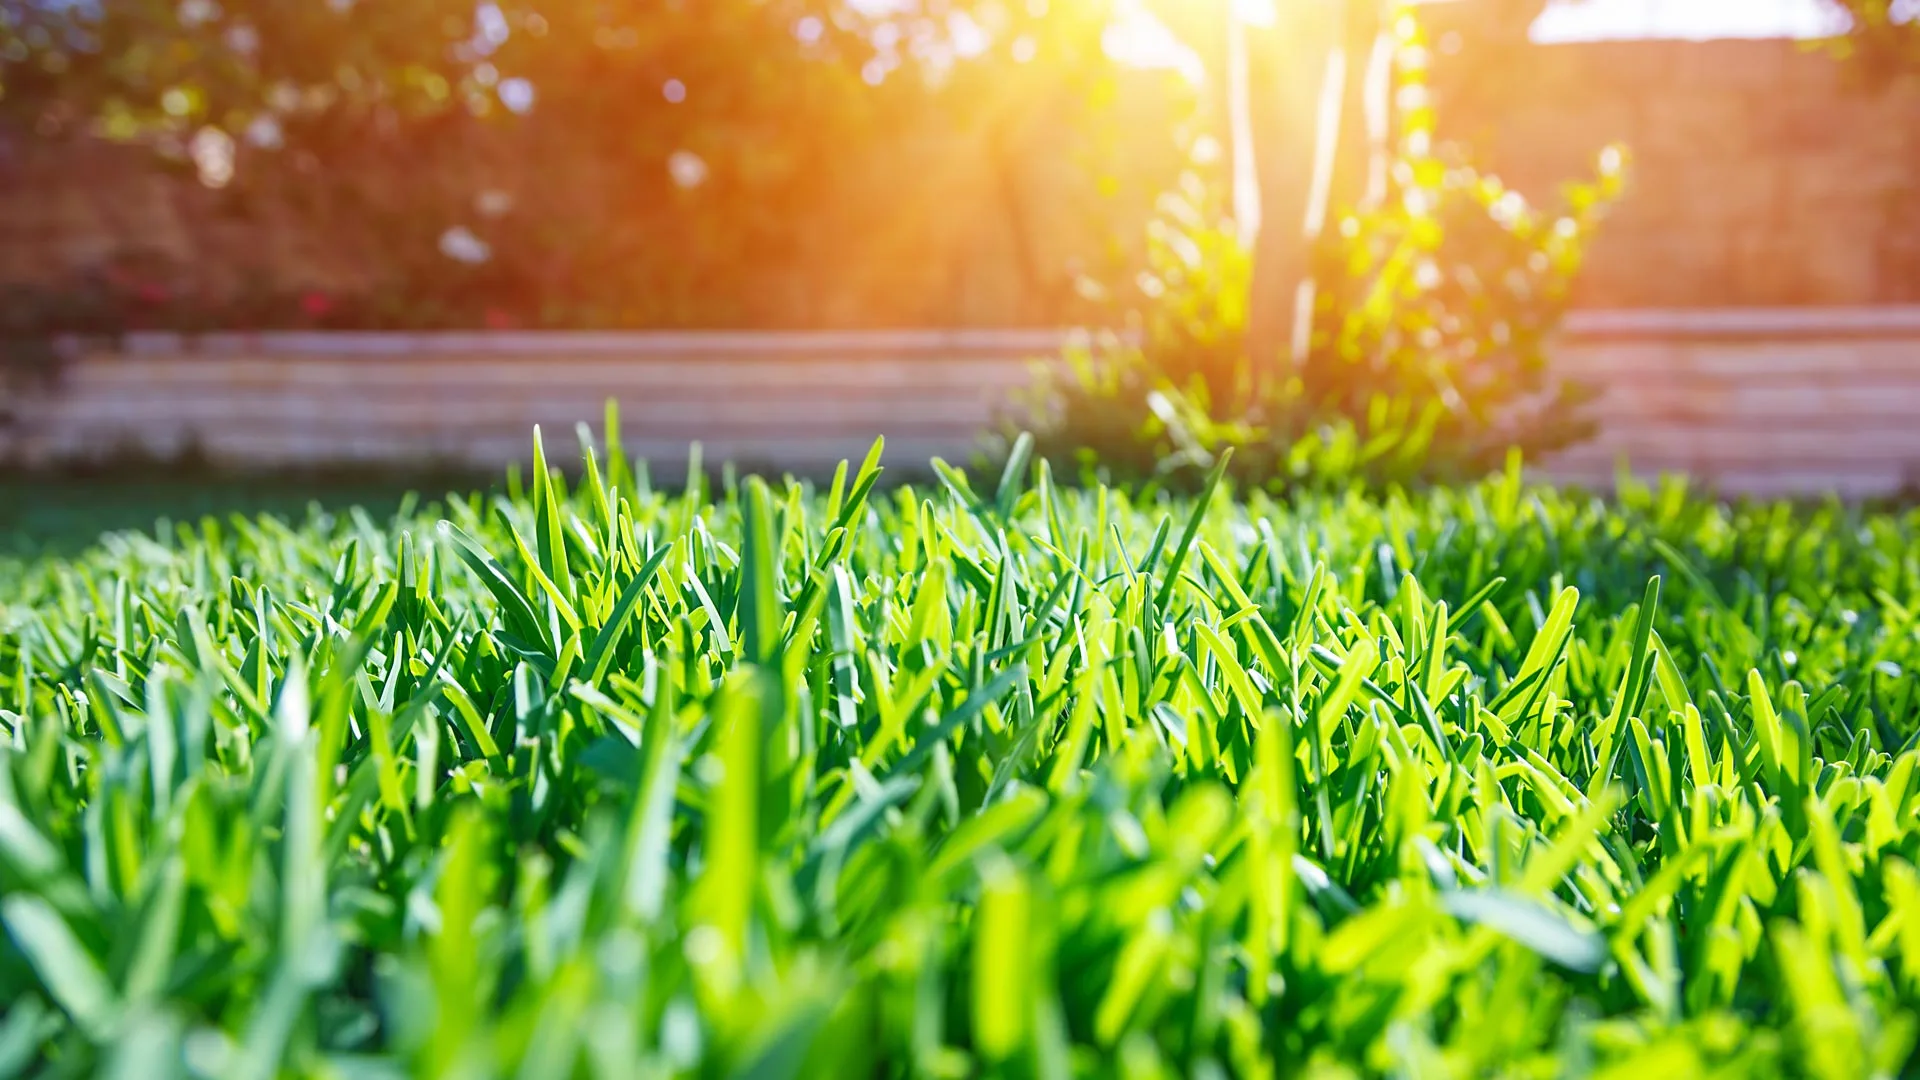 Investing in Consistent Lawn Care Is the Best Way to Prevent Lawn Diseases